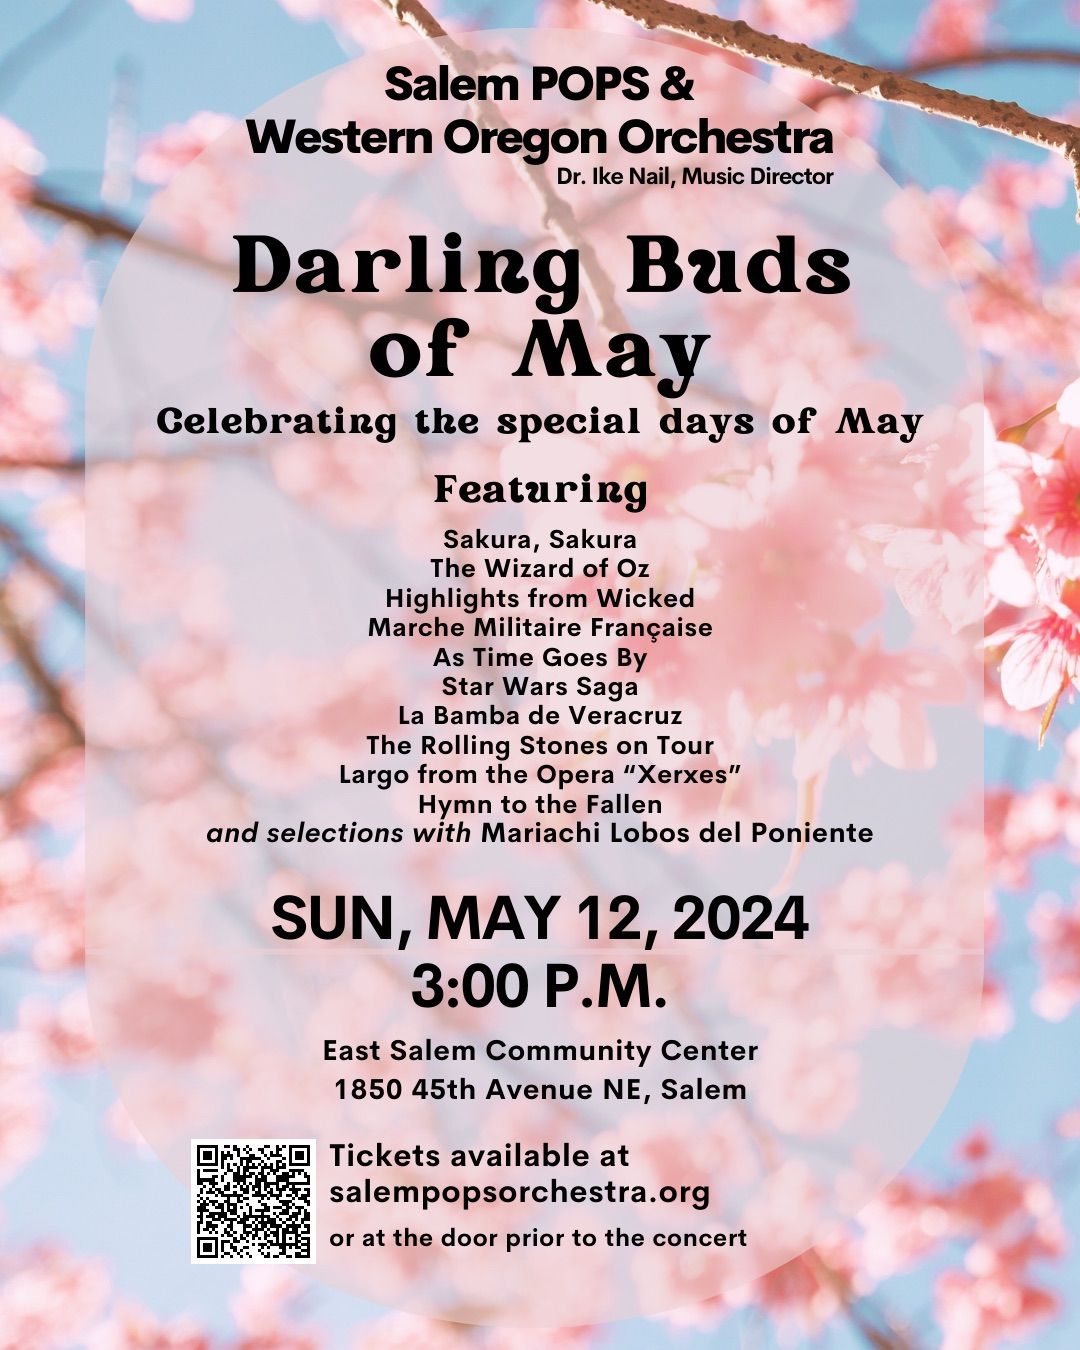 Salem Pops Orchestra - The Darling Buds of May